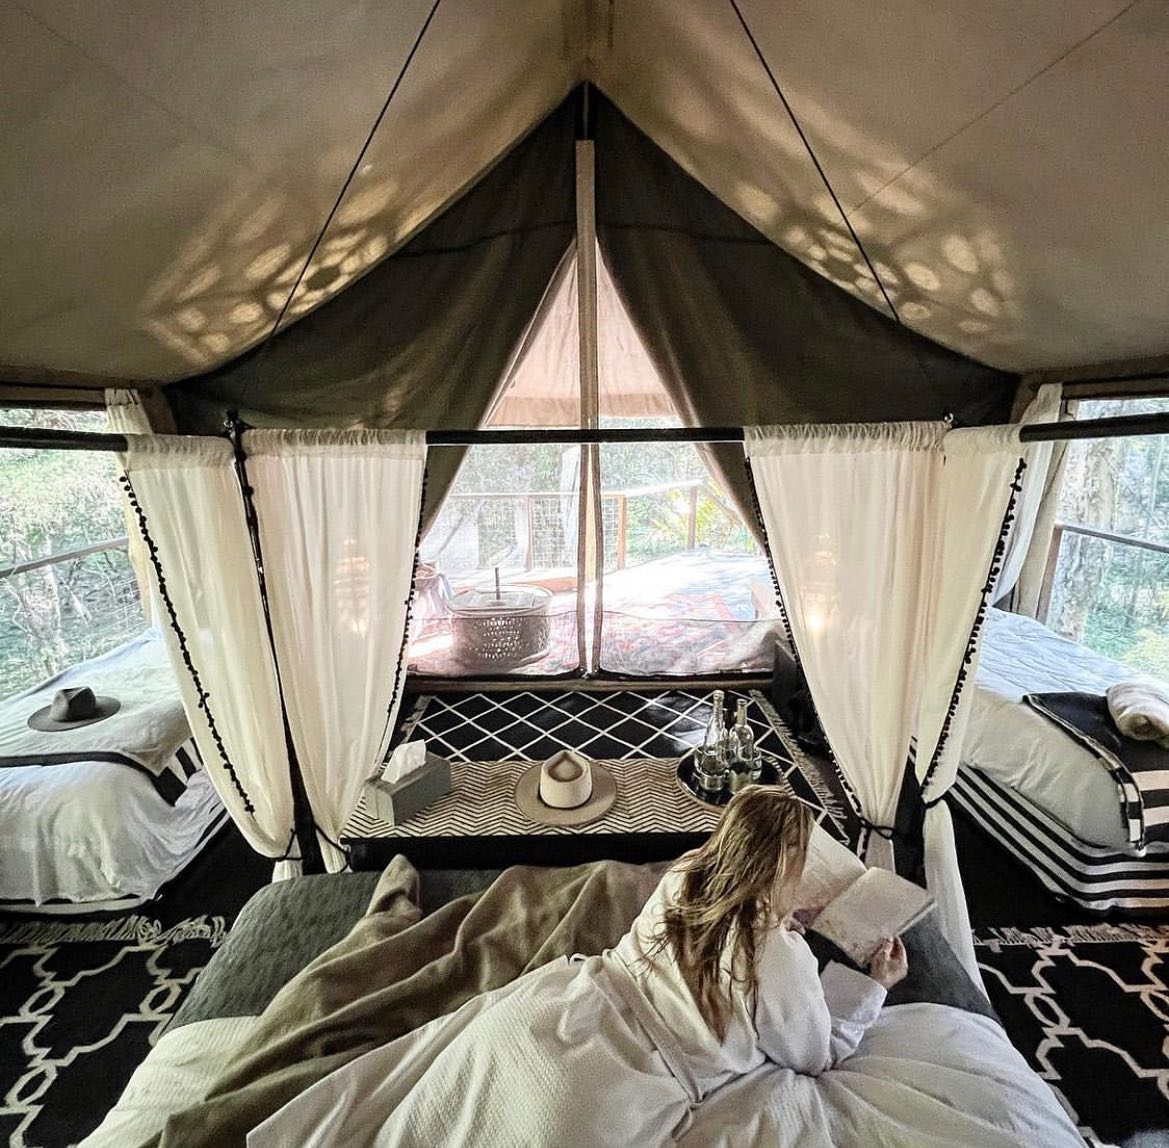 This is our big, beautiful, one (and only) King Deluxe safari tent, and as a result for most of the year is booked out months in advance.. but not THIS WEEKEND! Nothing much planned? Jump online and surprise your loved one with a romantic and peaceful bush escape this weekend ❤️ this image by recent guest @charlotte_riddle 🙏. 
:
:
#visitnsw #seeaustralia #lastminute #LoveNSW #uniqueboutiquecollection #southcoastglamping 
#visitshoalhaven #unspoilt #southcoastexperiences #discoverjervisbay #jervisbay #glamping #southcoast #bushretreat  #southcoastdreaming #visitsouthcoastnsw  #shoalhaven #100beachchallenge #feelnsw #holidayherethisyear #shortbreak #luxurycamping